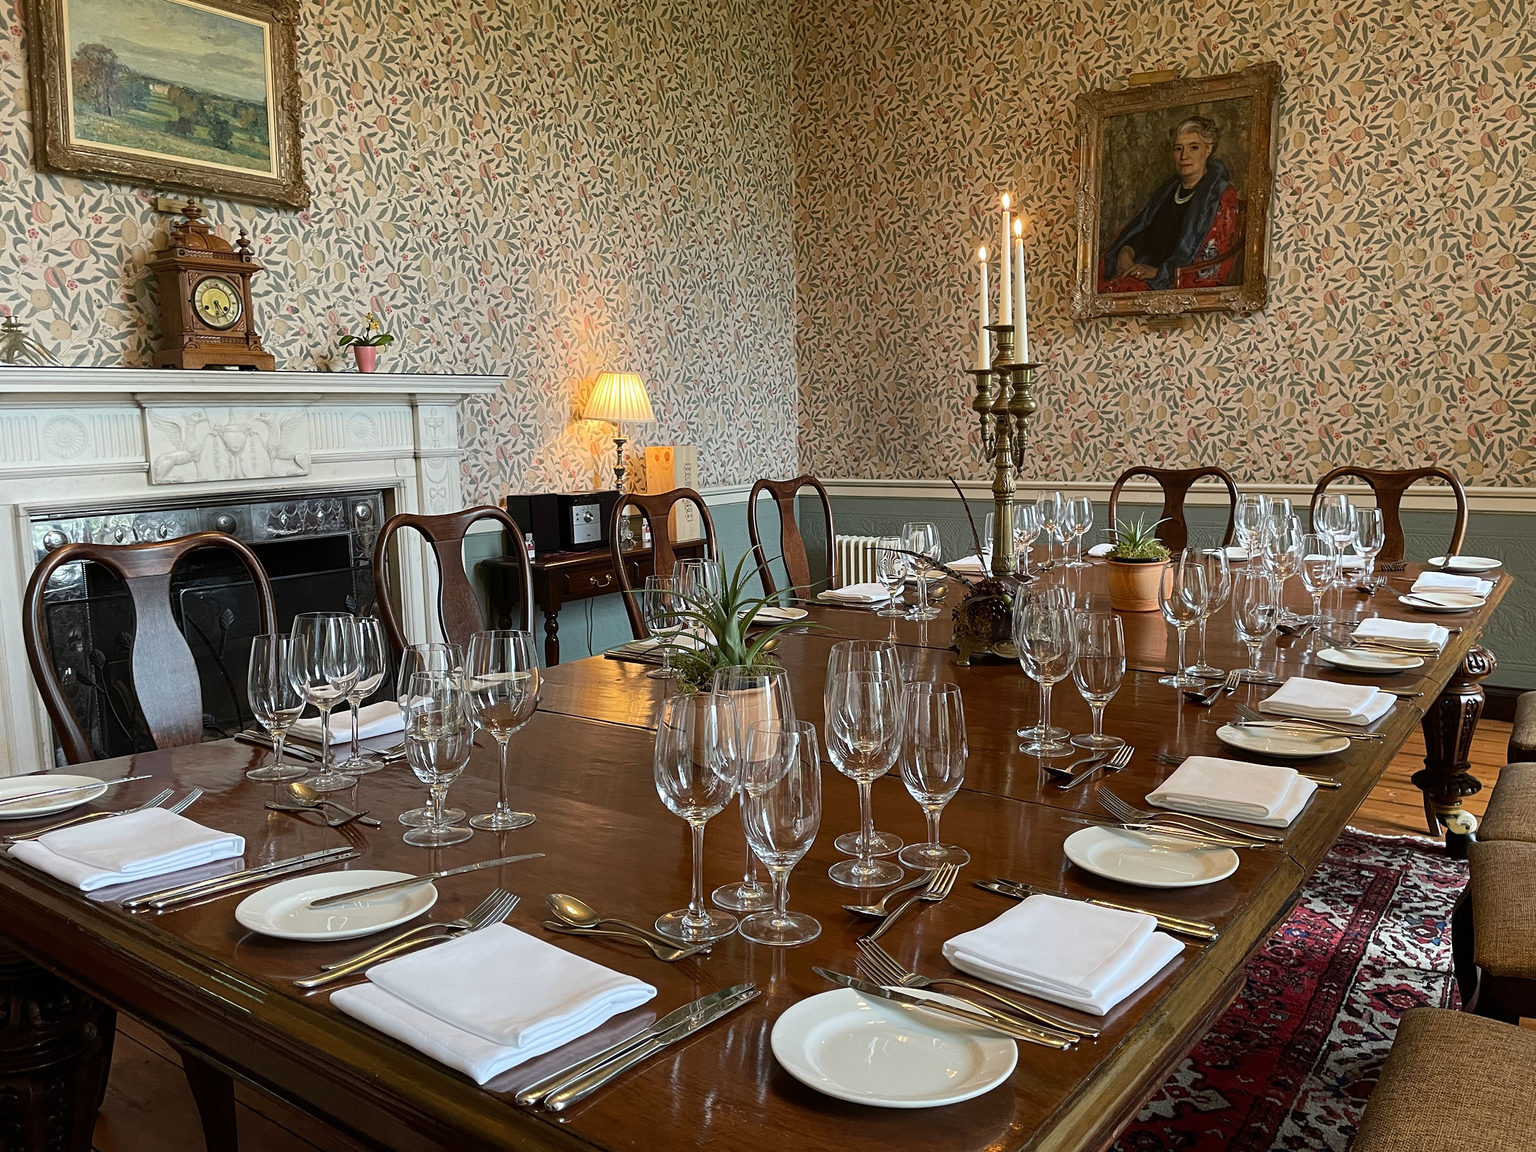 The private dining room at Swinton Park Hotel in North Yorkshire set up for a private corporate dinner